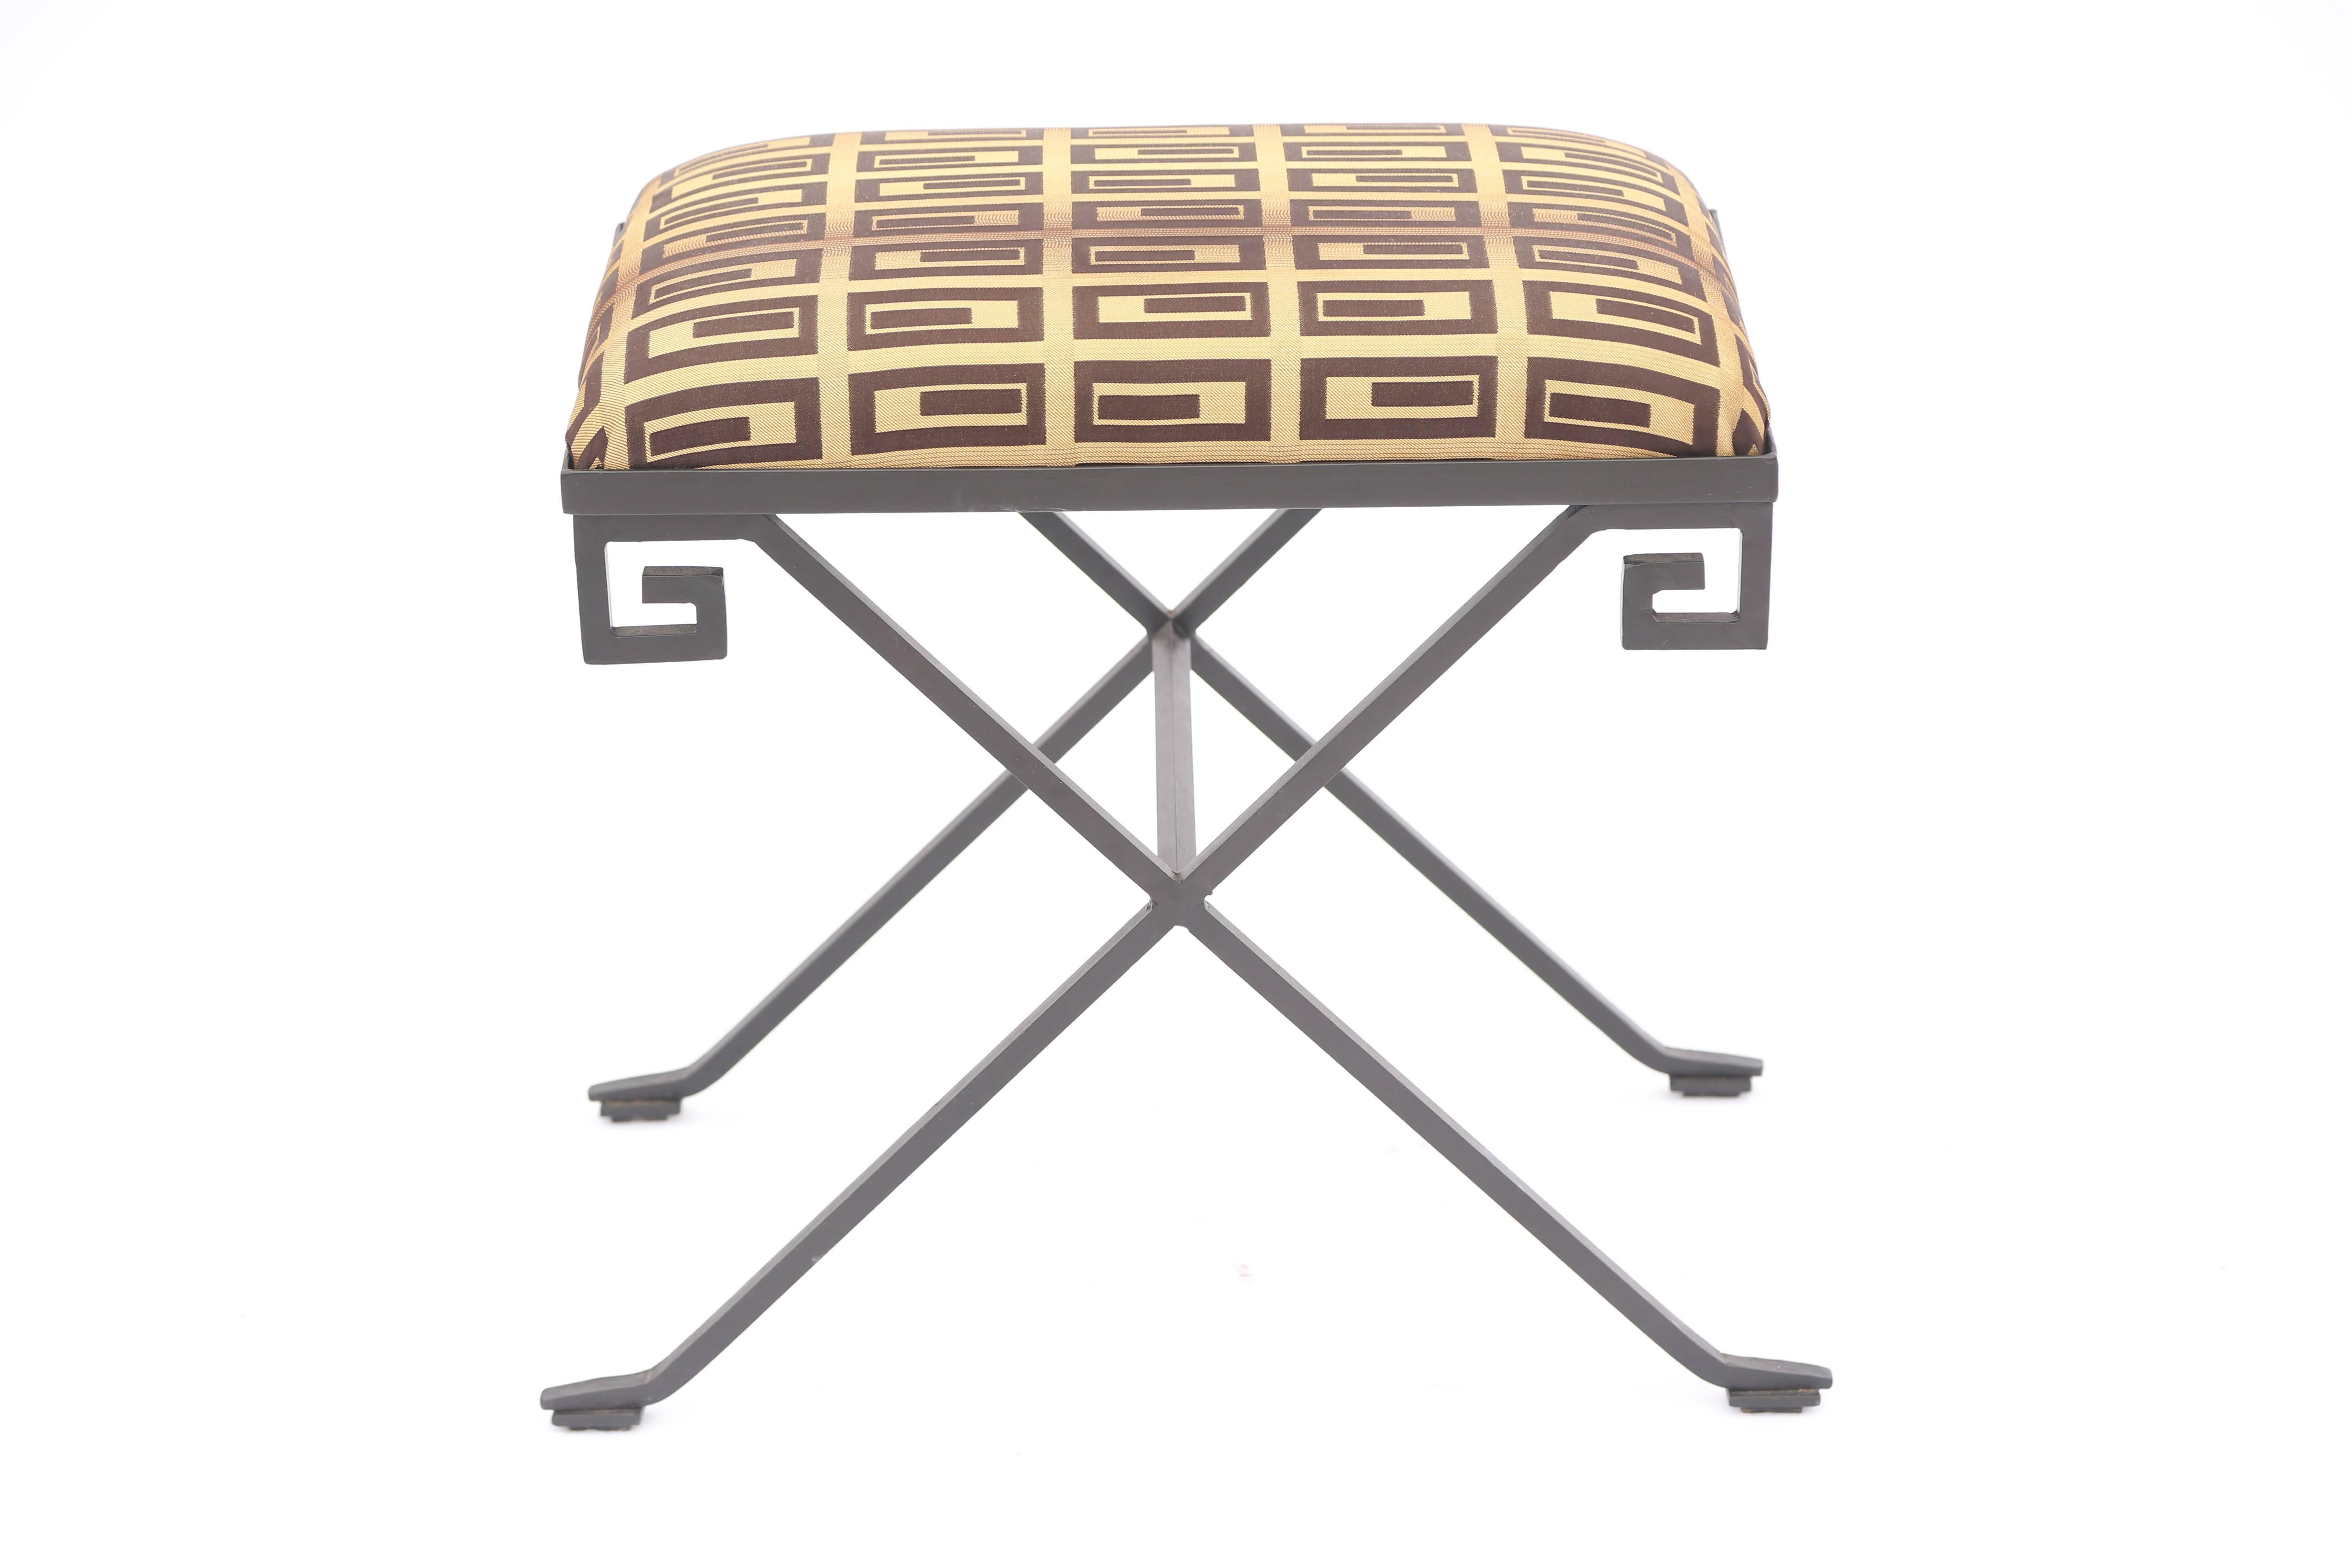 Black iron stool, in the style of Jean-Michel Frank, having Greek Key design at each corner, X-legs connected by stretcher; seat with custom upholstery. Stamped 